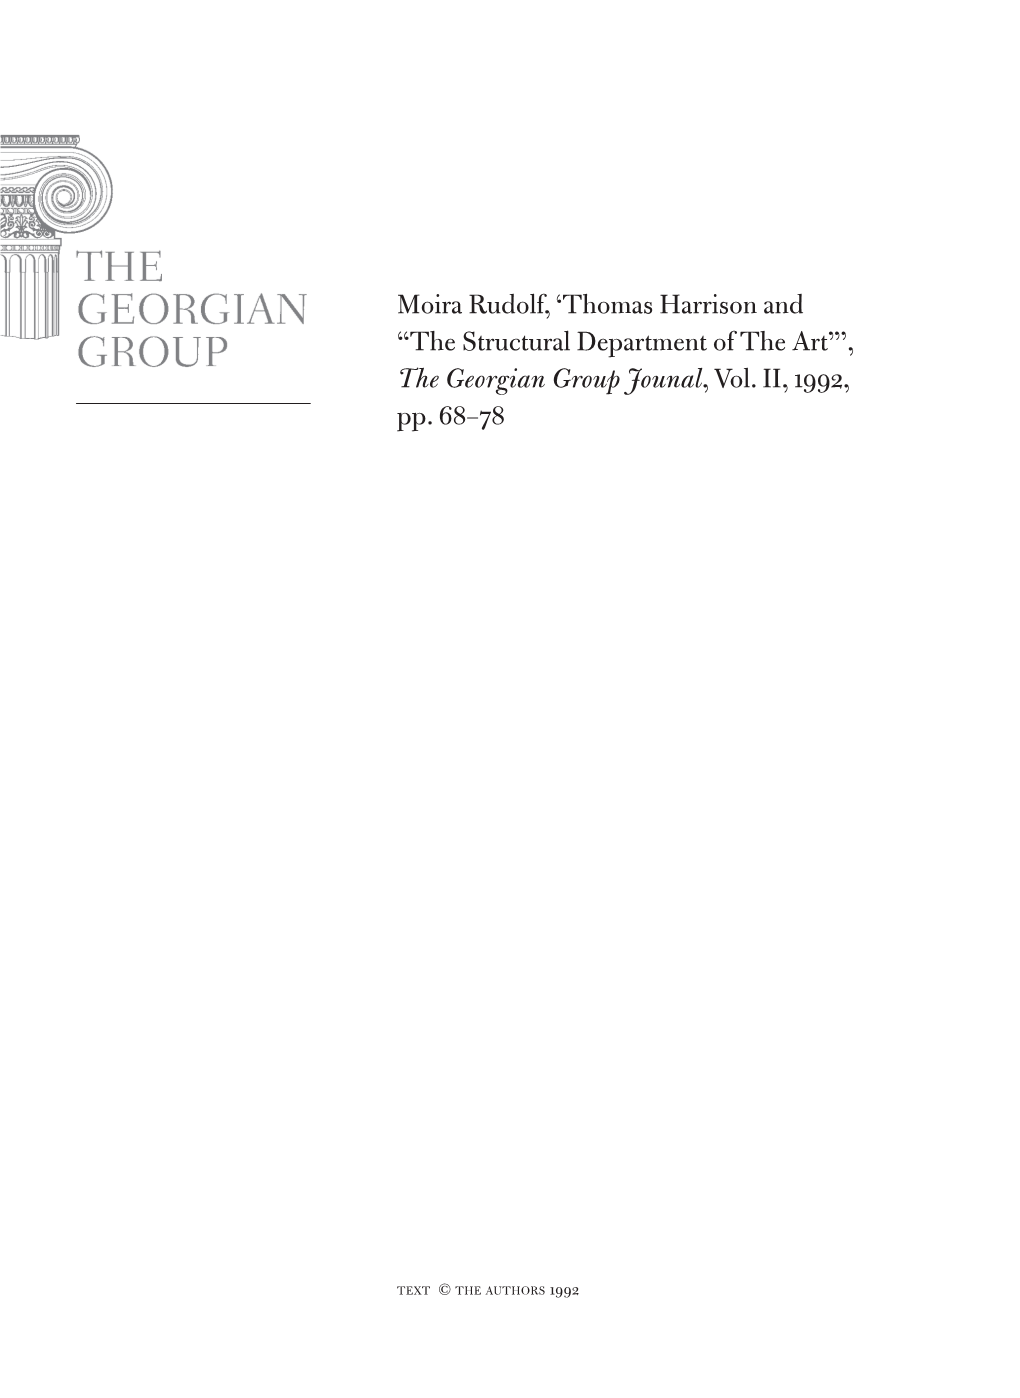 Thomas Harrison and “The Structural Department of the Art”’, the Georgian Group Jounal, Vol